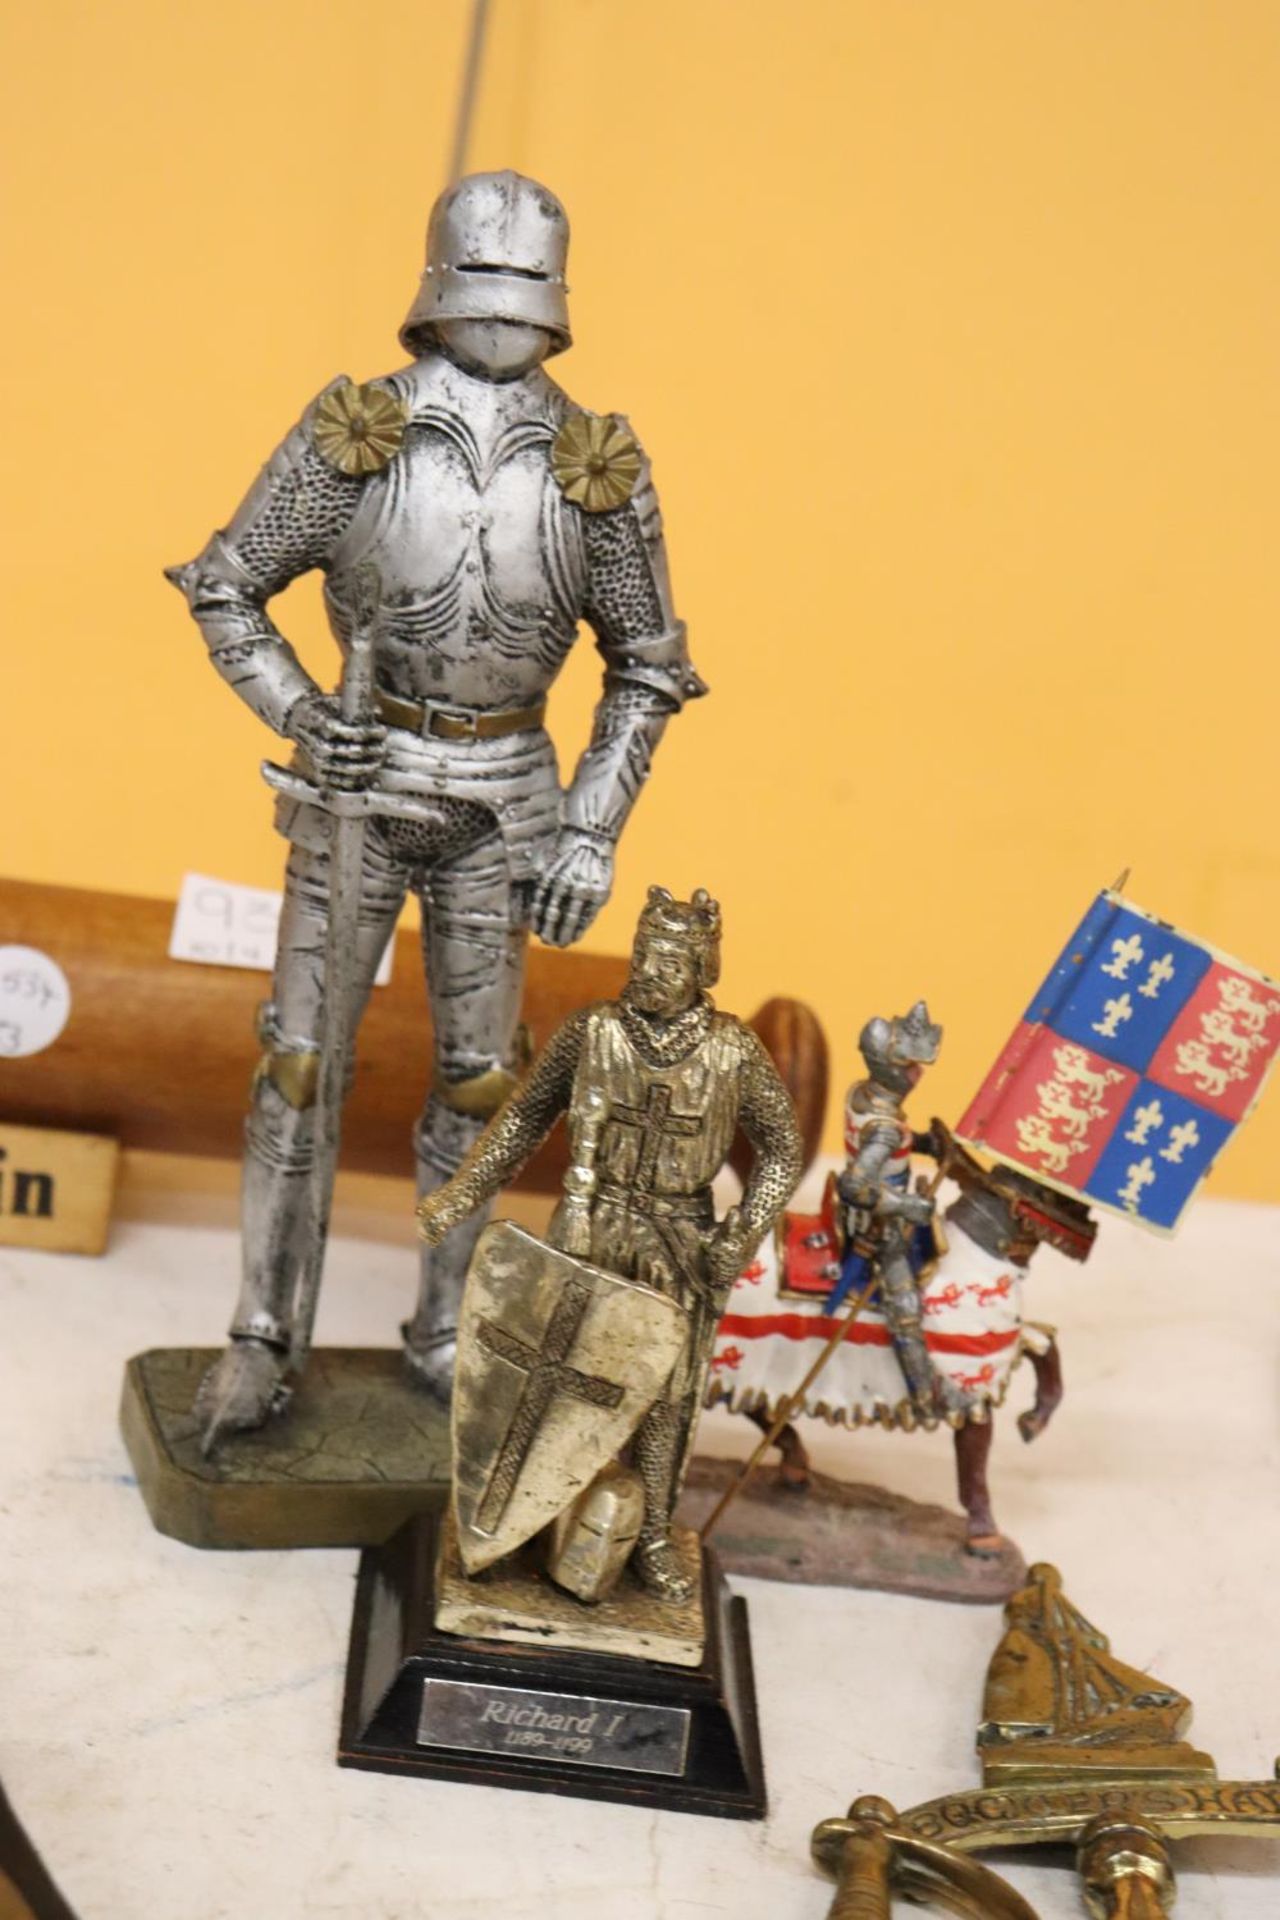 THREE SMALL MODELS OF KNIGHTS PLUS TWO BRASS SWORD LETTER OPENERS - Image 3 of 6